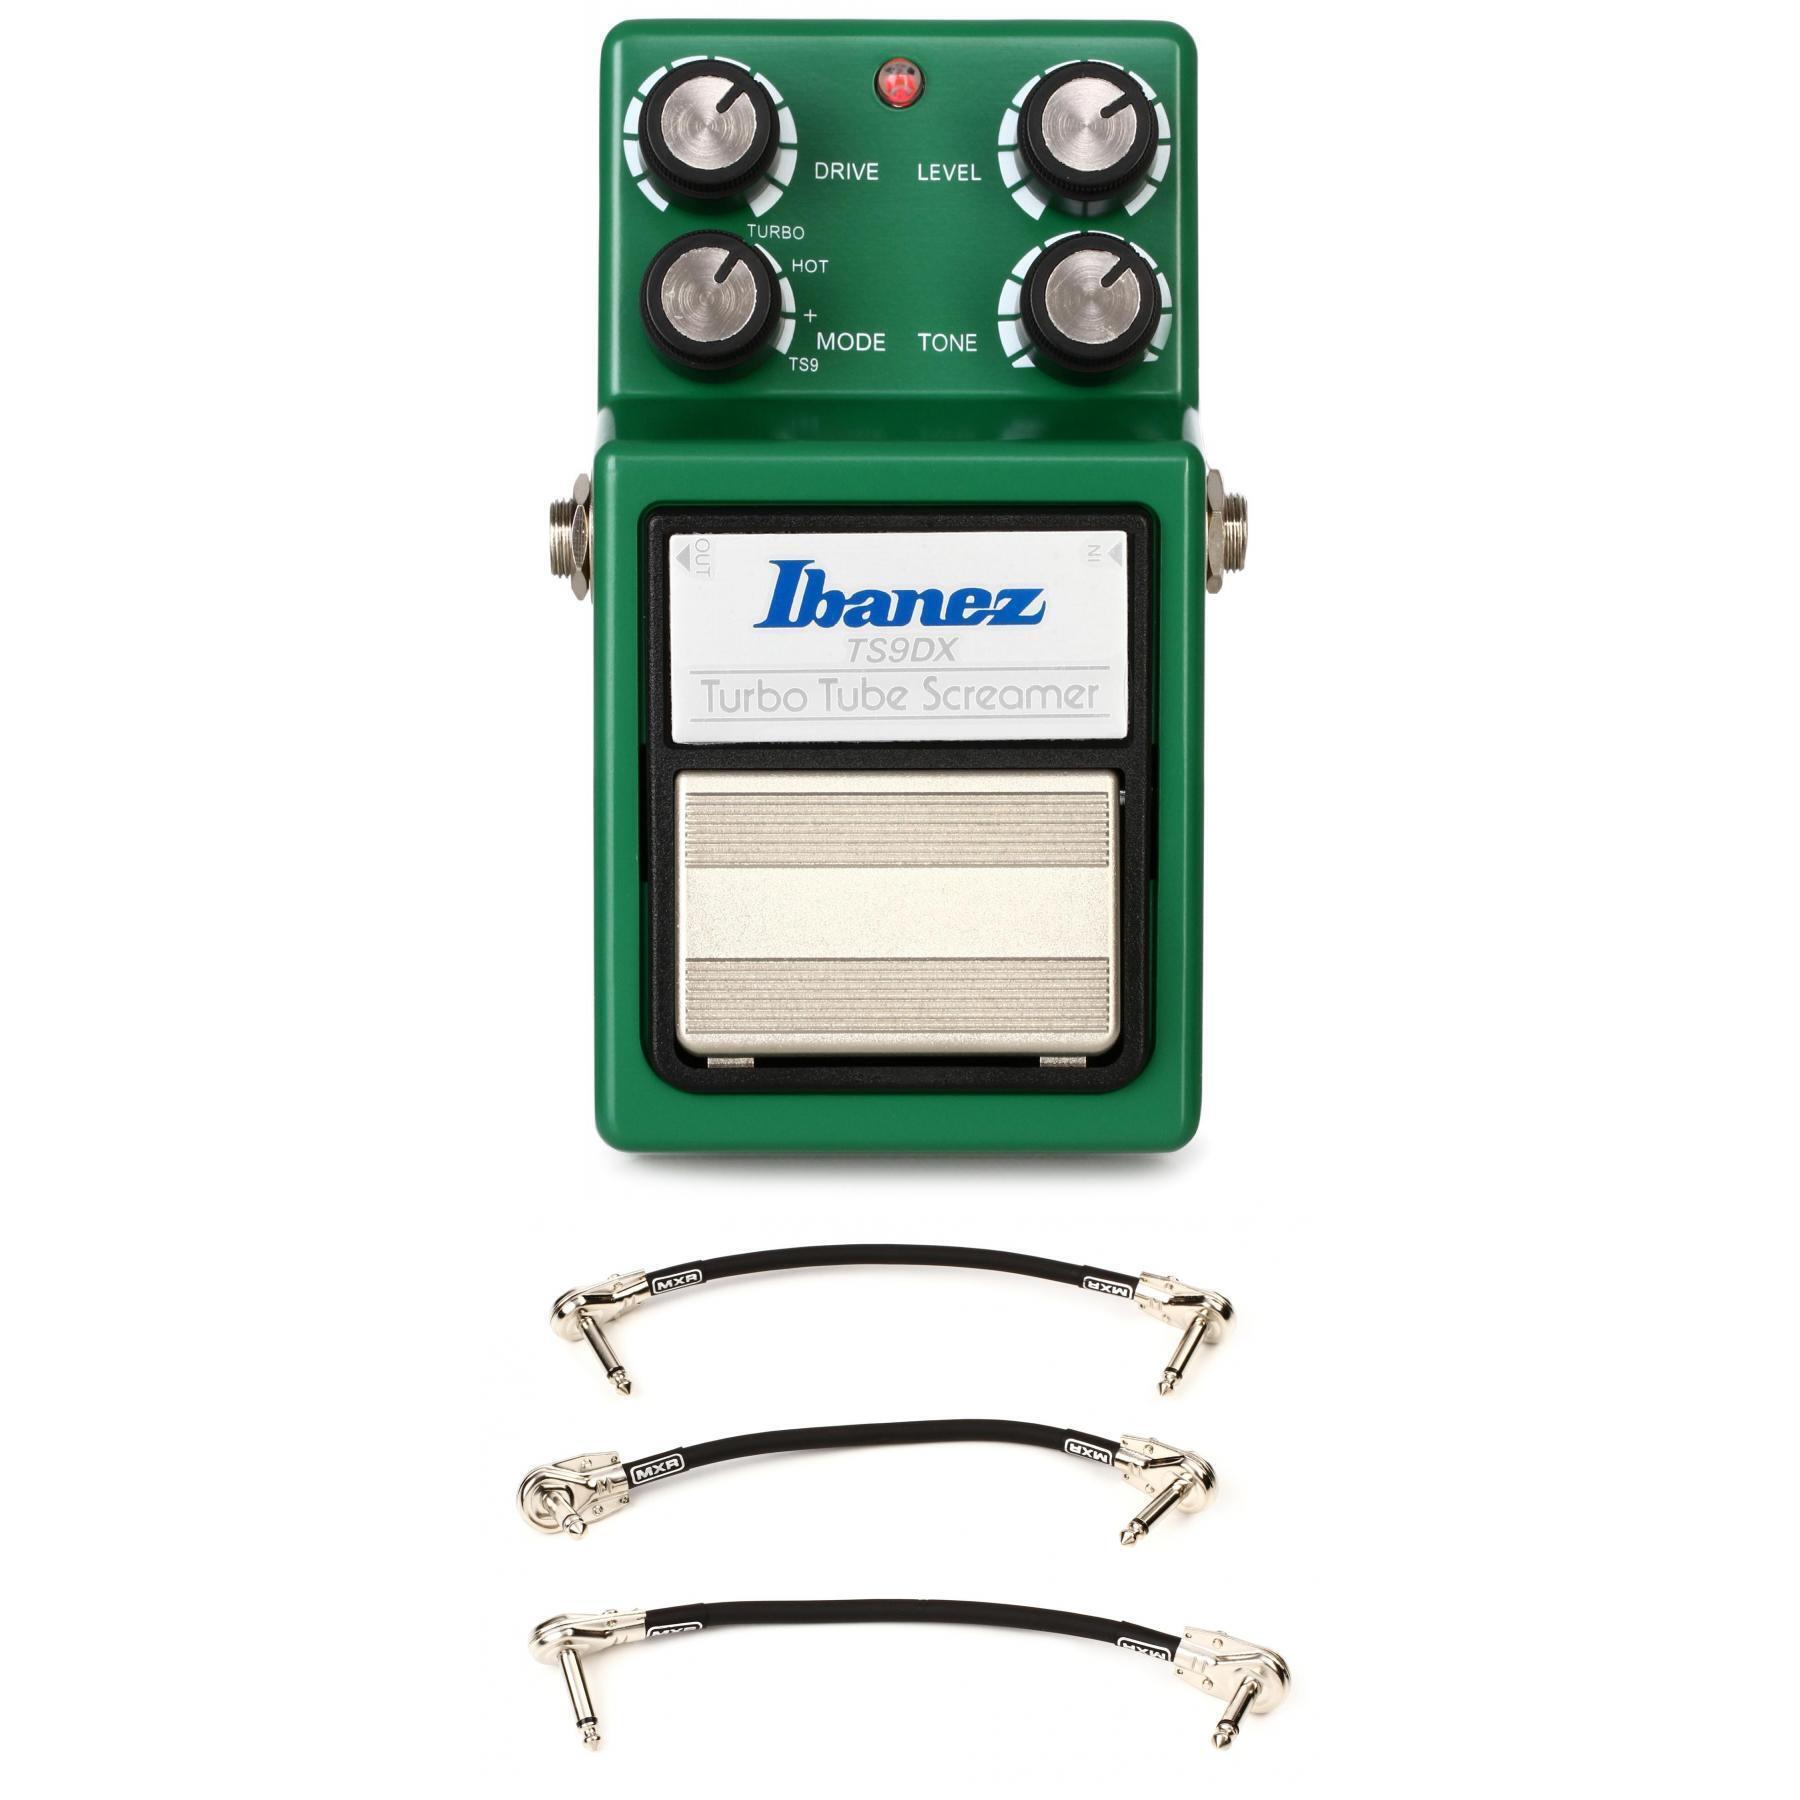 Ibanez TS9DX Turbo Tube Screamer Overdrive Pedal | Sweetwater